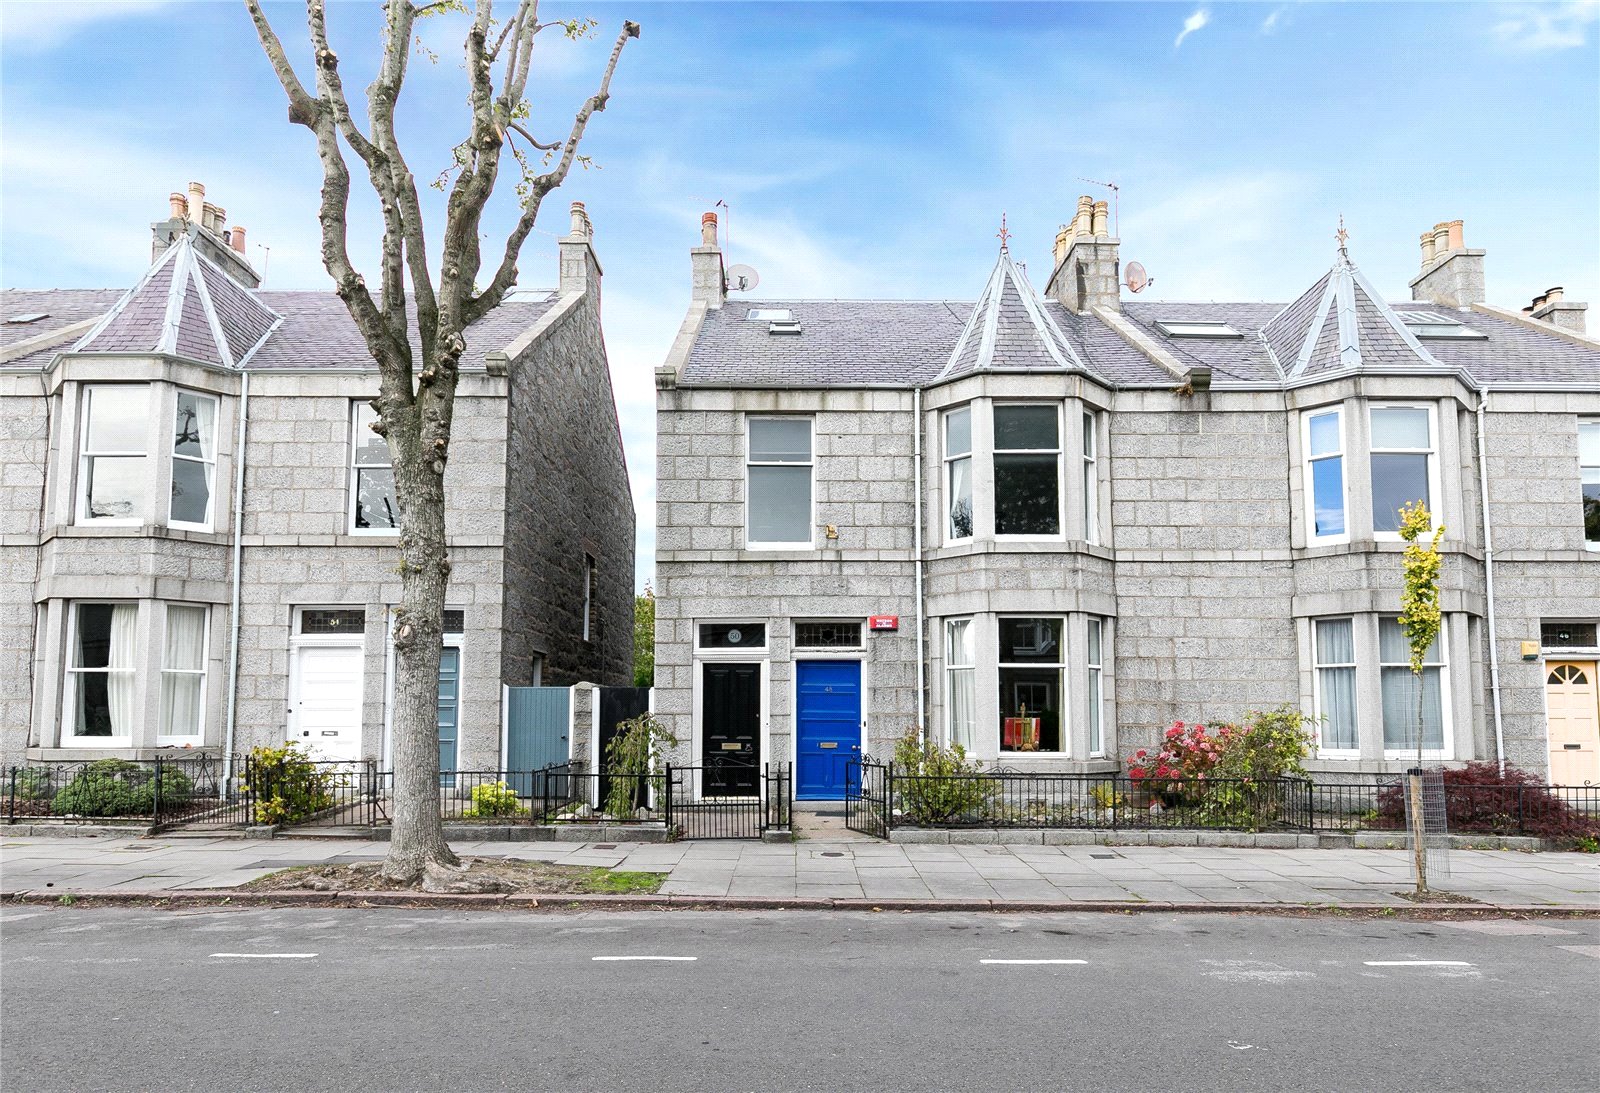 Our latest properties for sale or to let (7th March 2023)